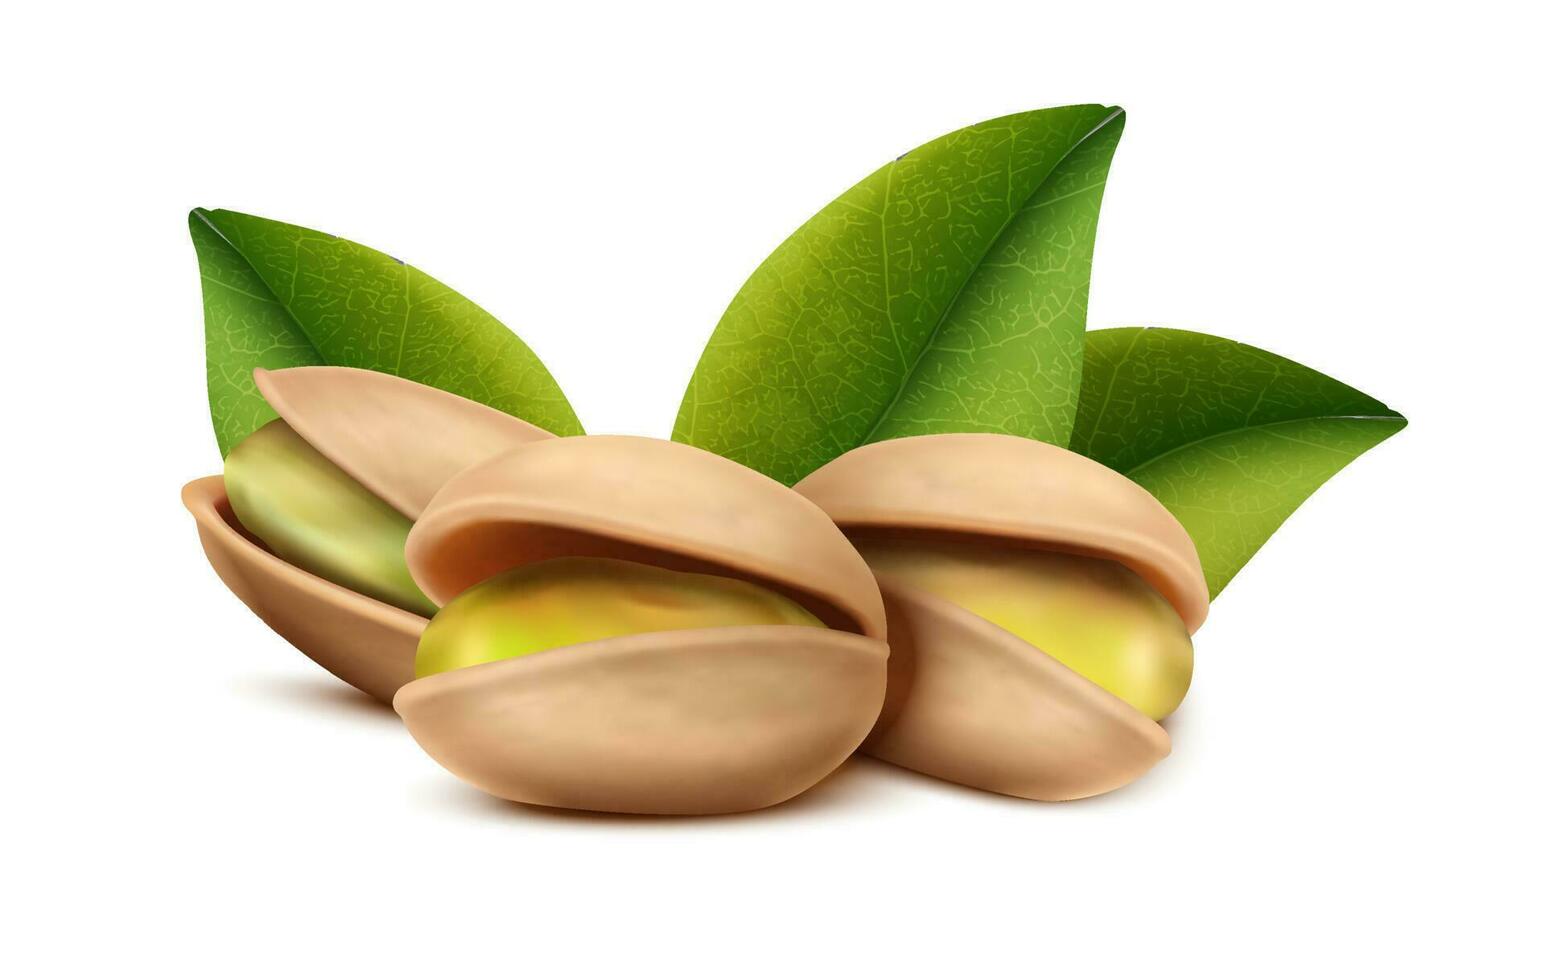 3d realistic vector icon. Pistachio nuts with leaves. Isolated on white background. Design element for packaging, banners, advertising and flyers.